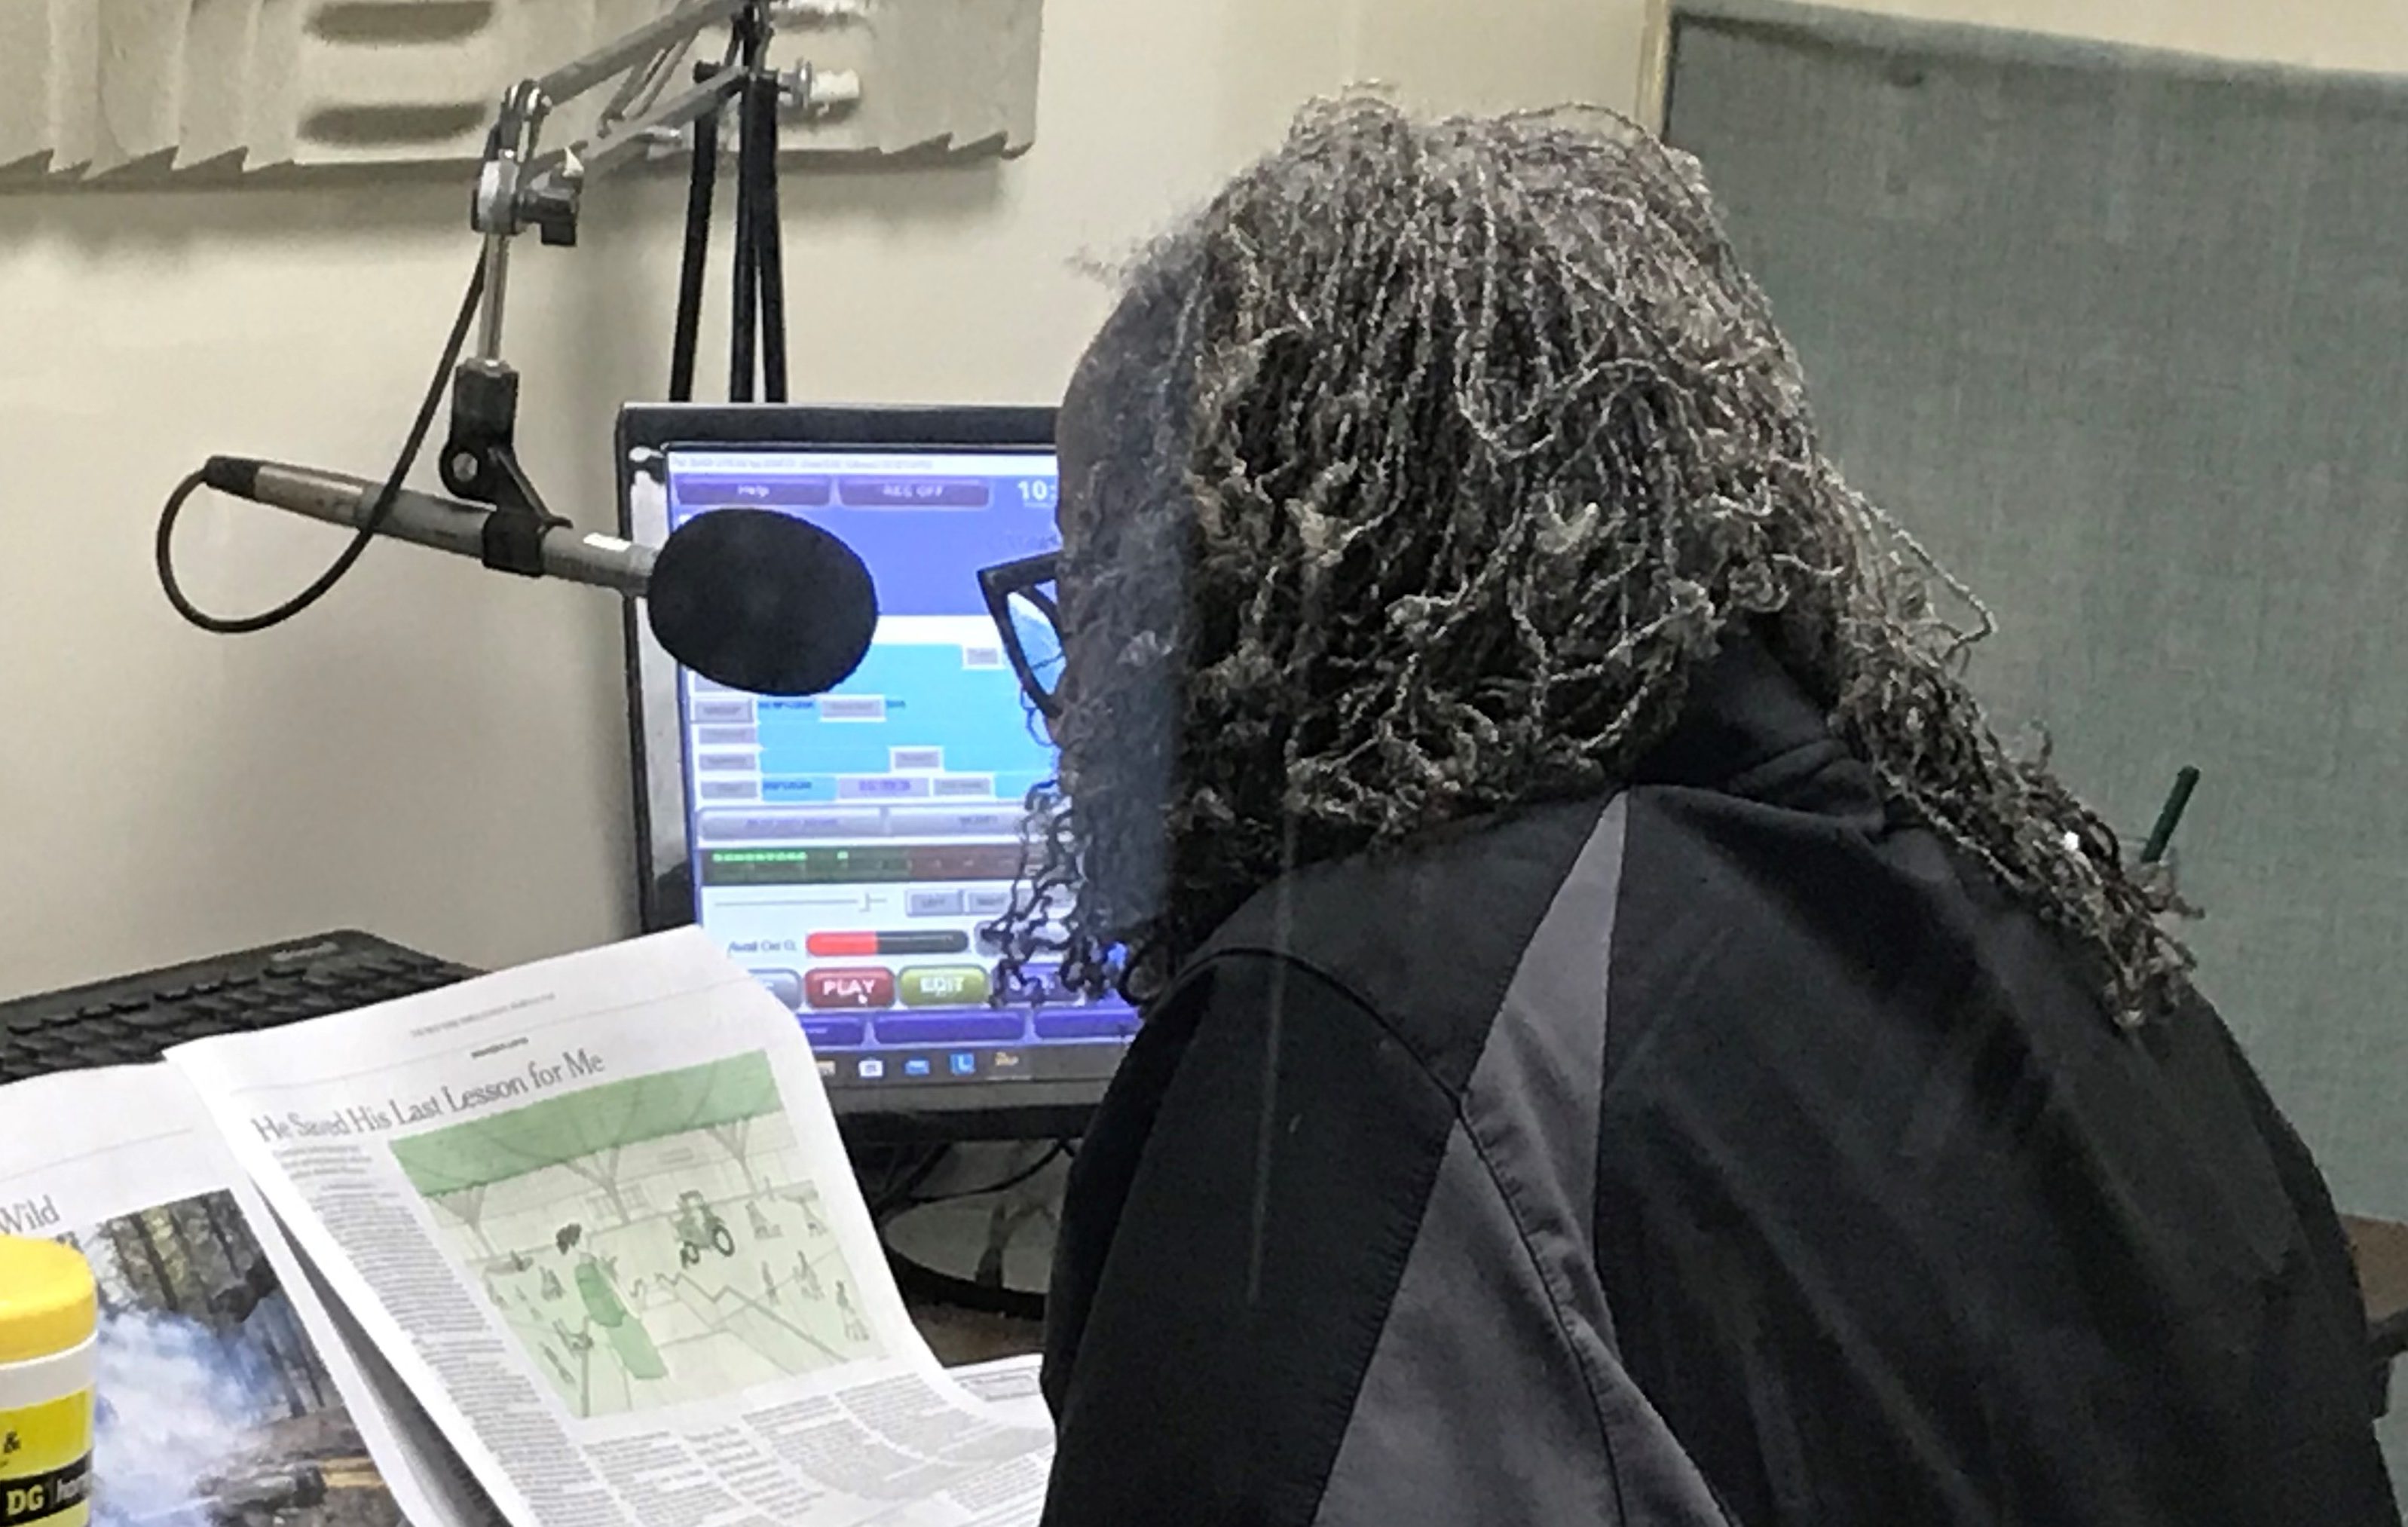 Photo shows a reader recording the NY Times